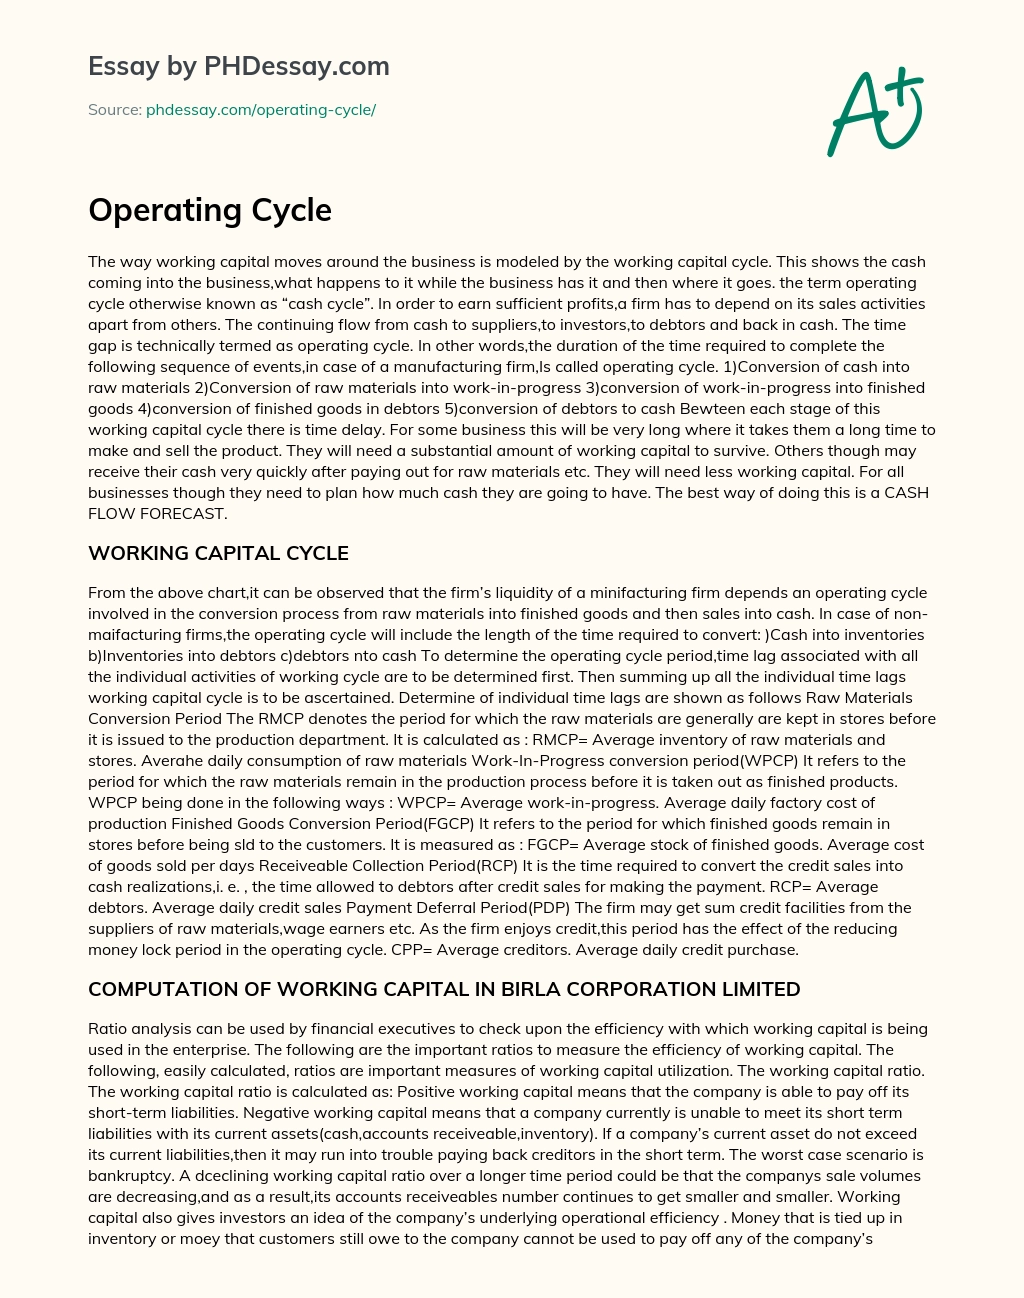 Operating Cycle essay